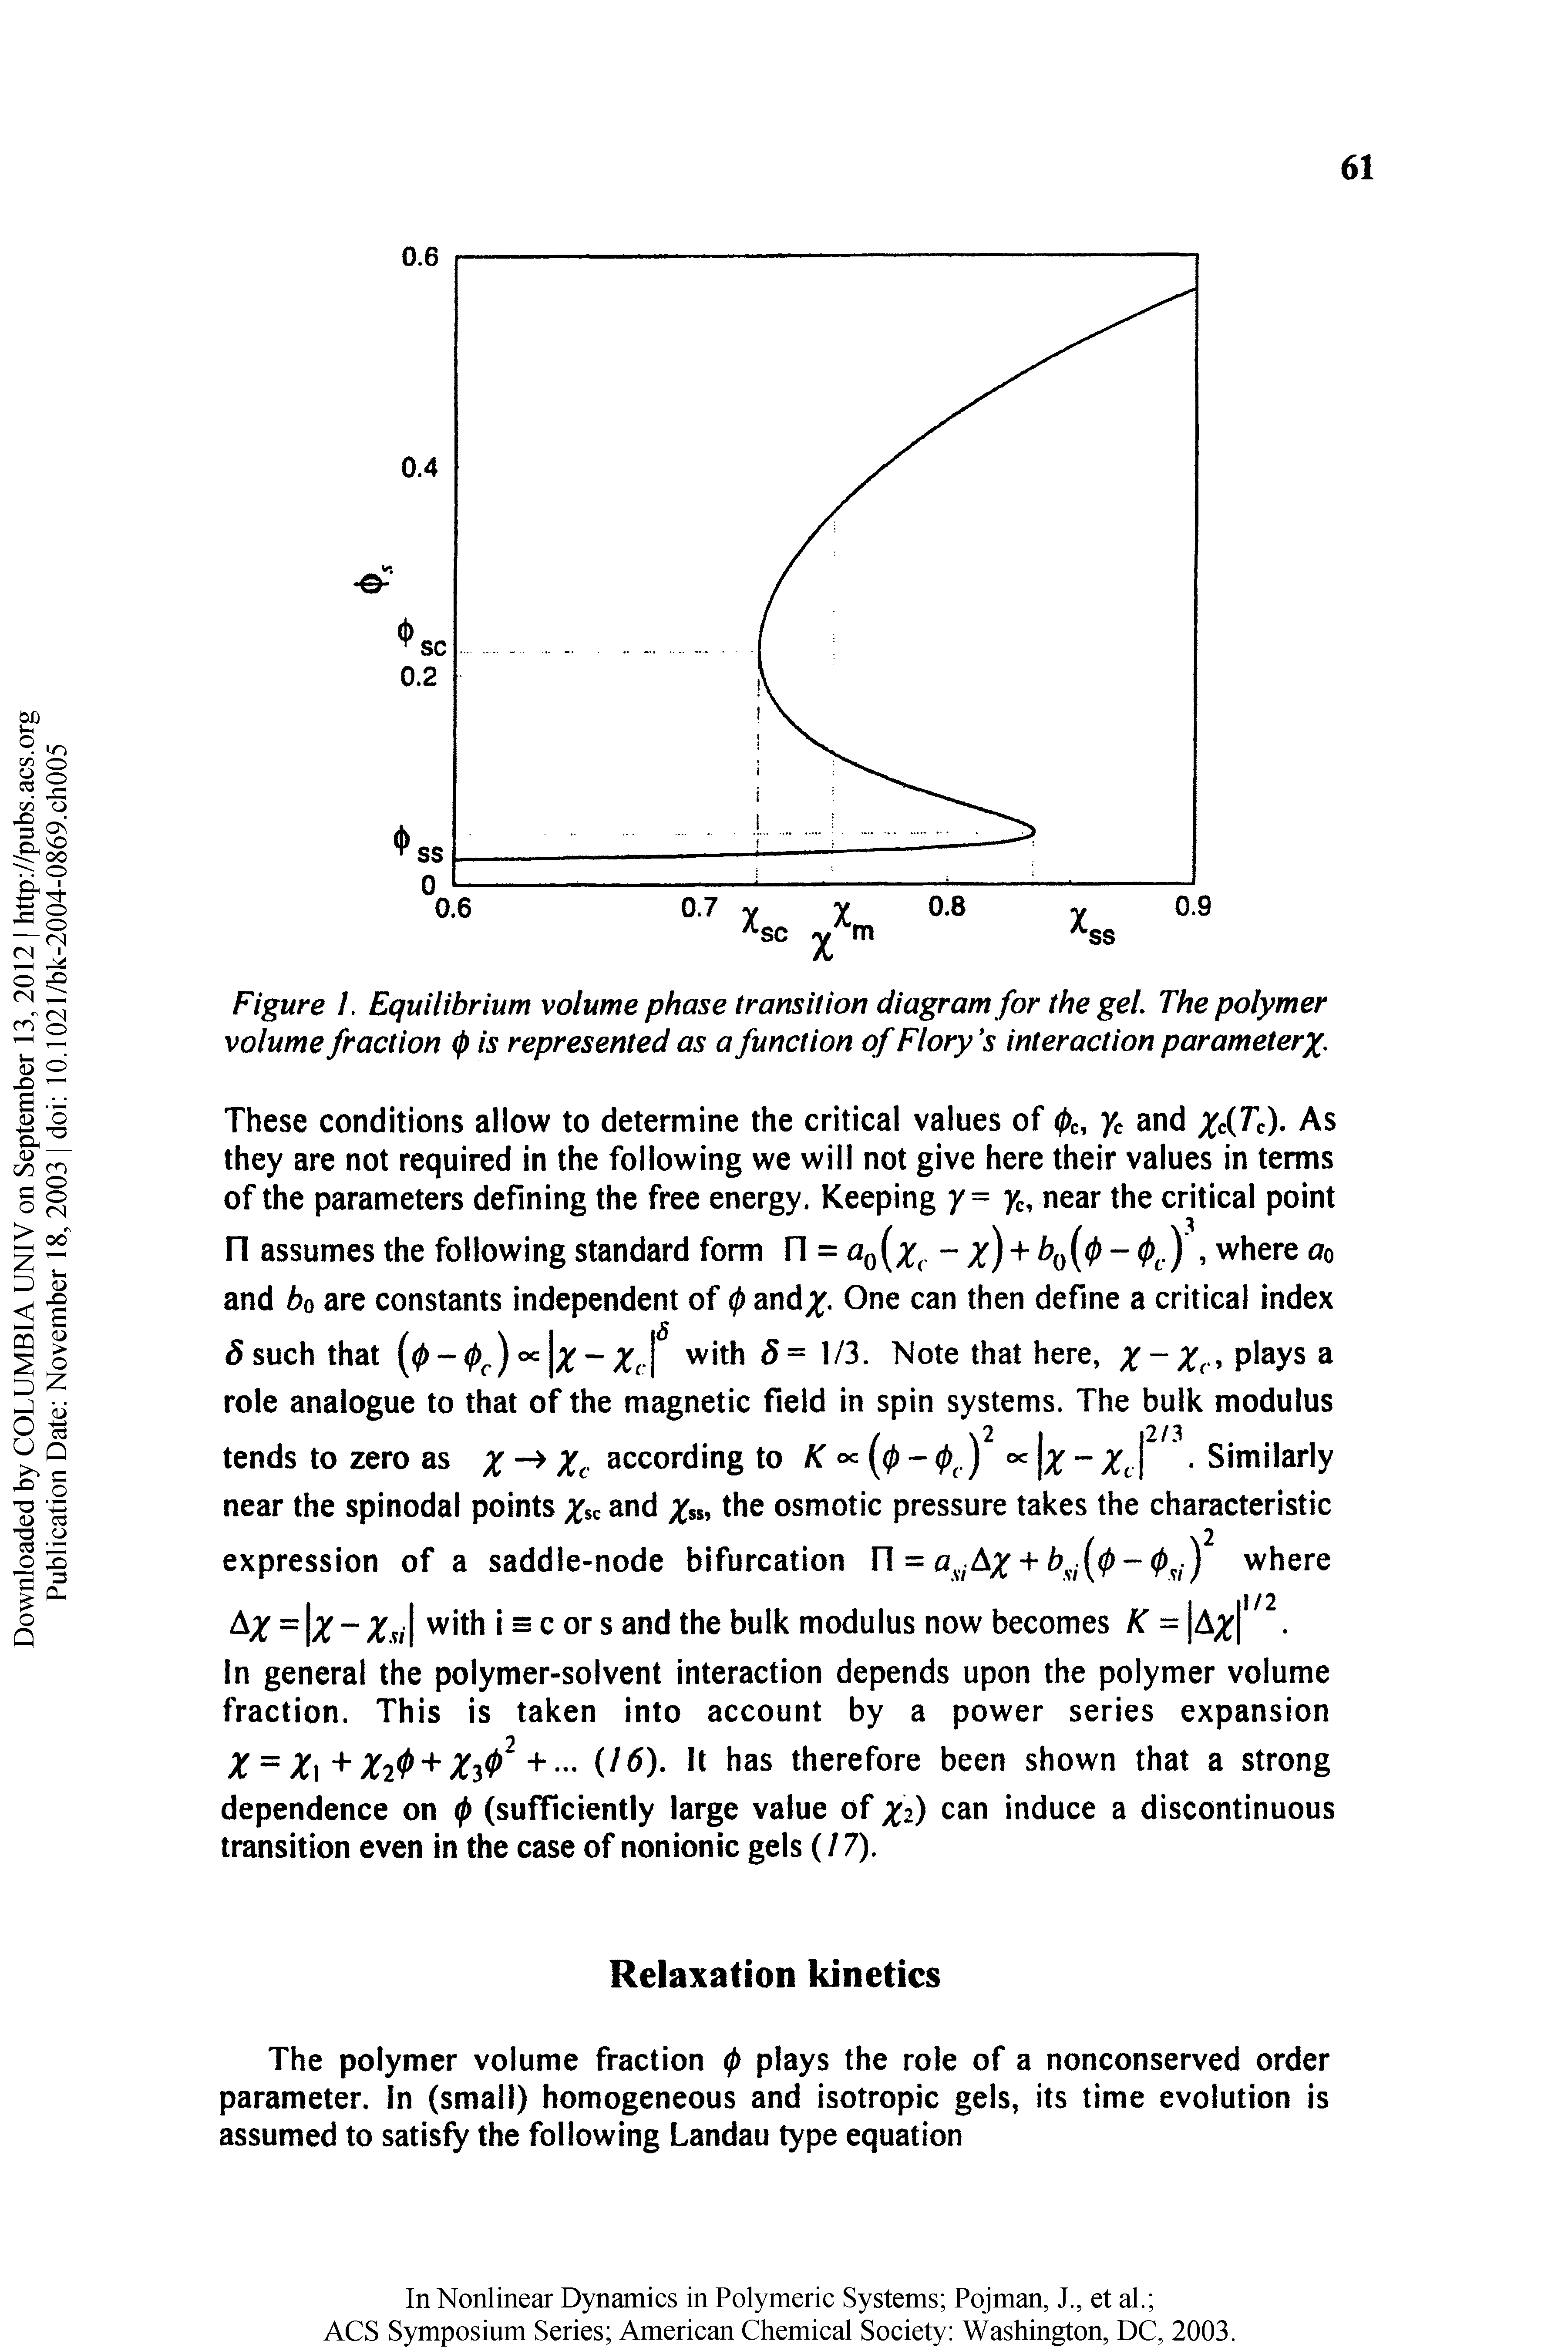 Figure /. Equilibrium volume phase transition diagram for the gel The polymer volume fraction (f> is represented as a function of Flory s interaction parameterX-...